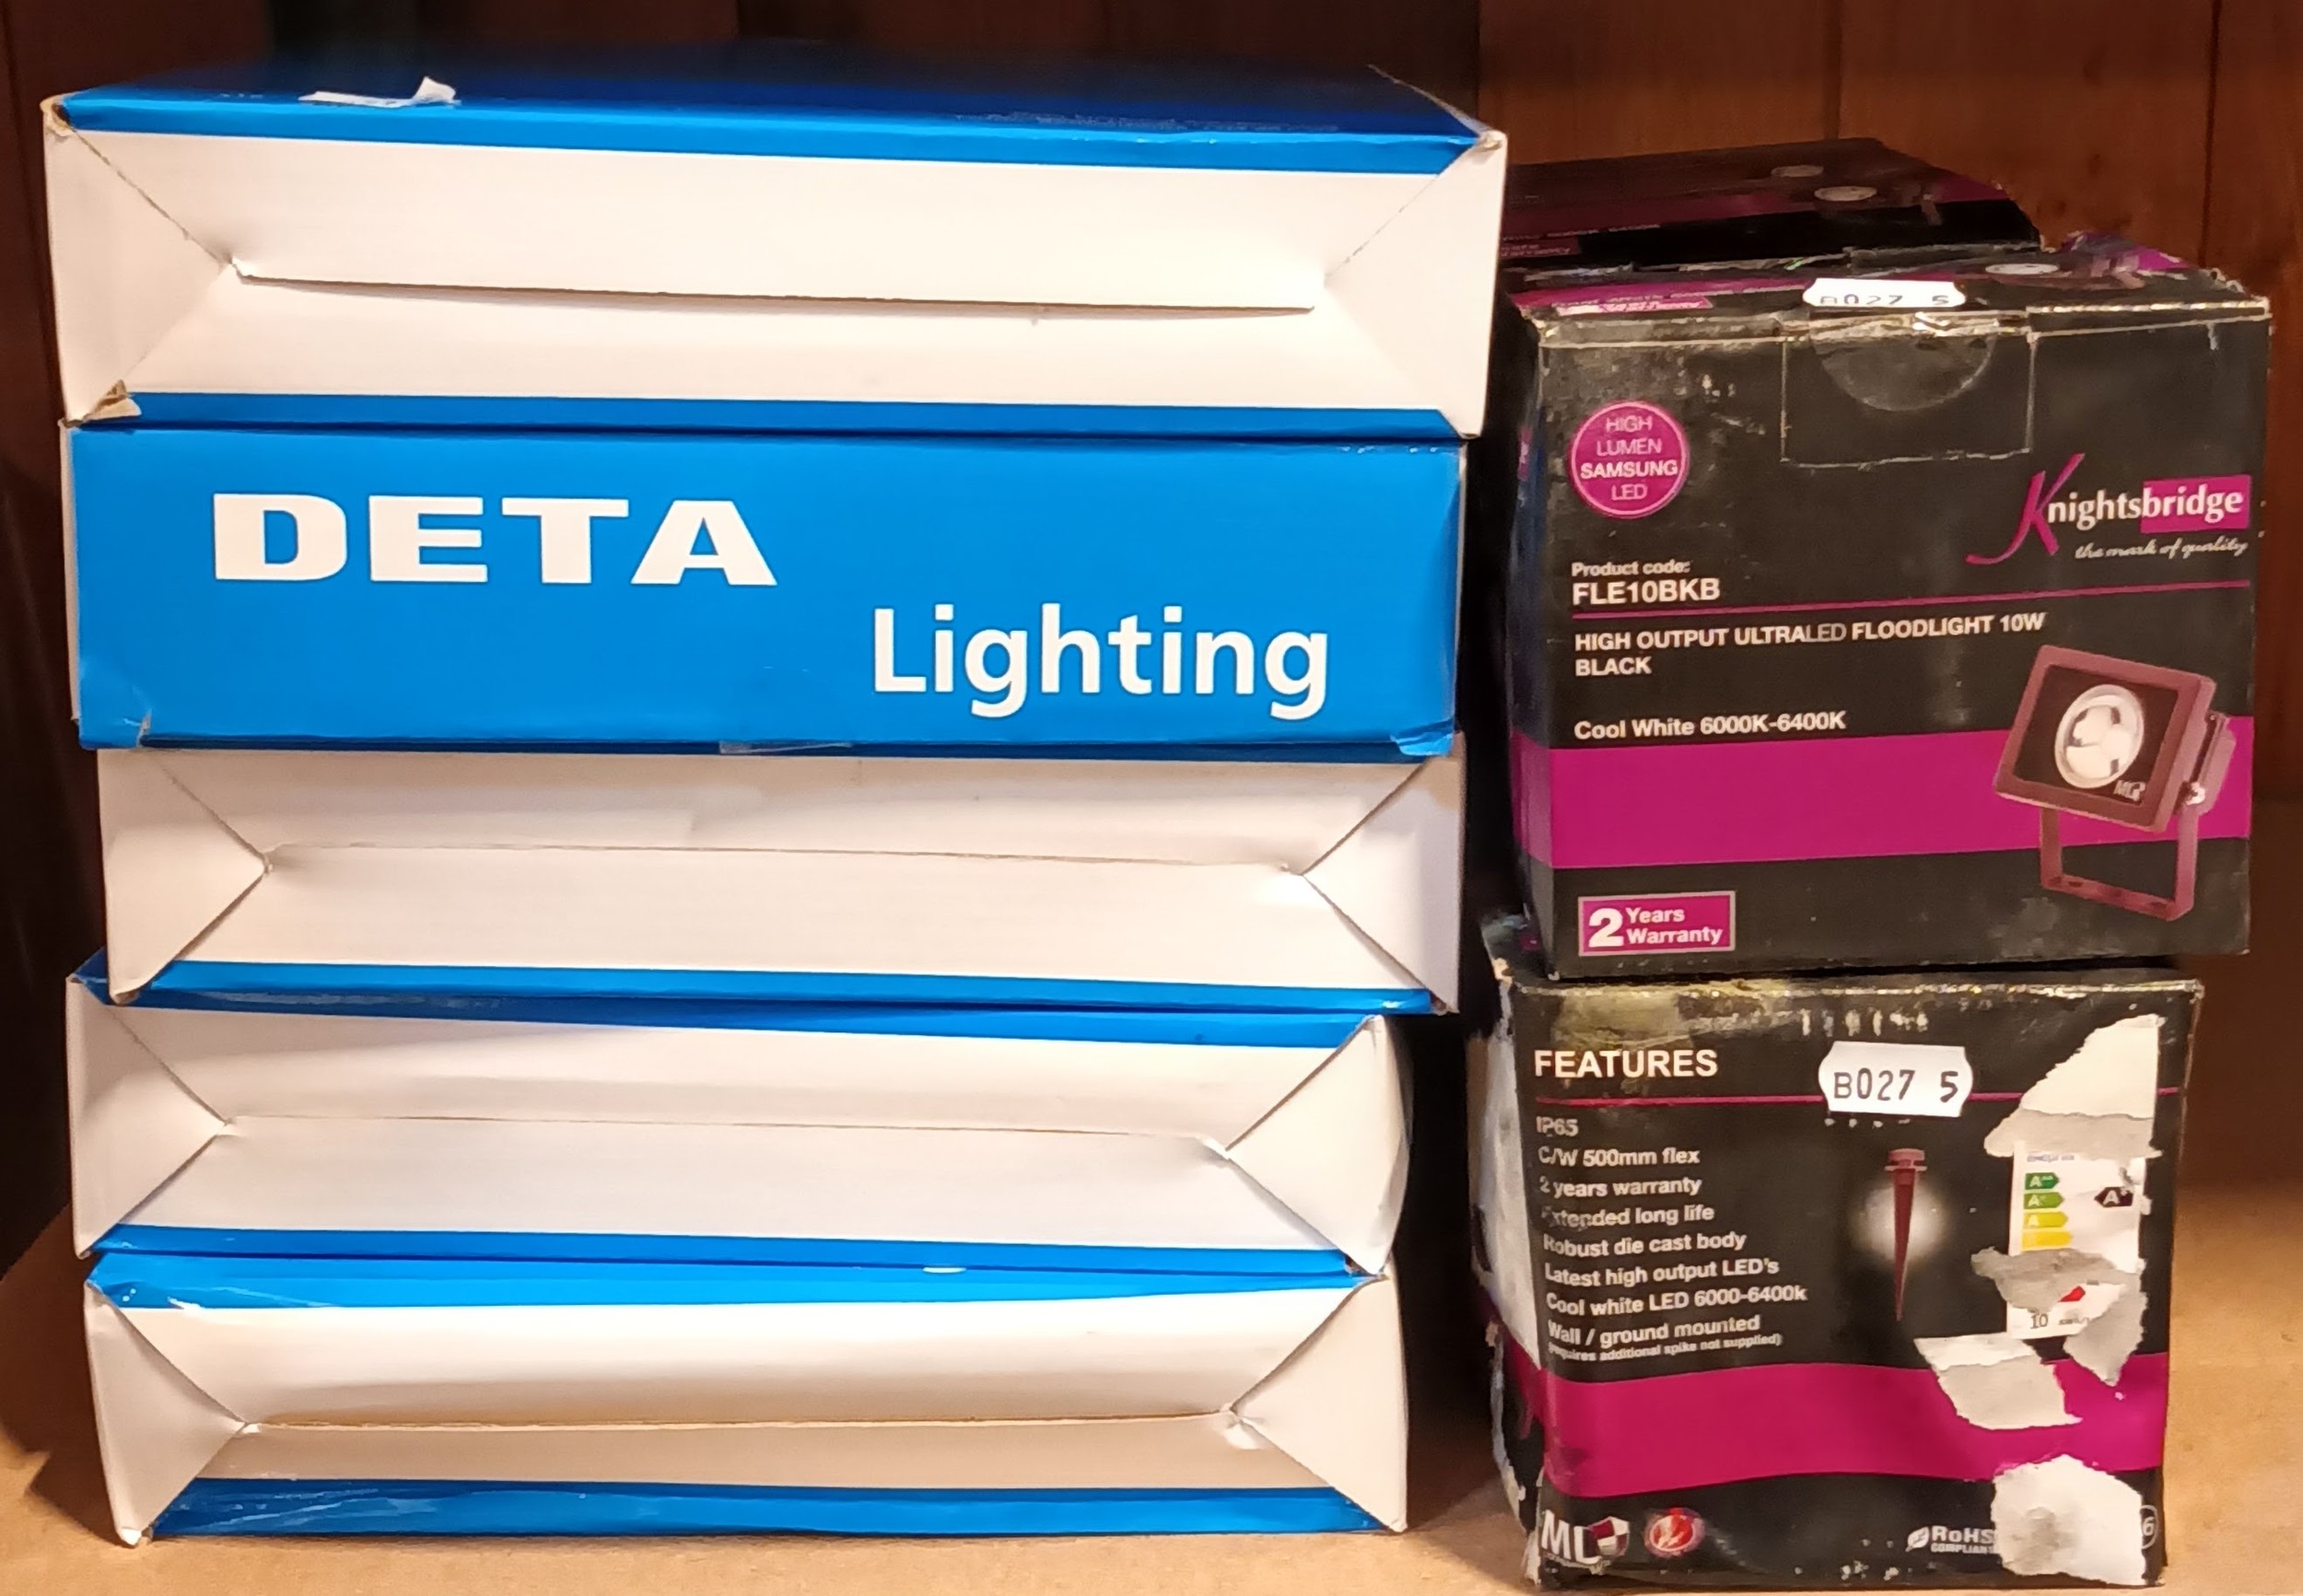 Five Deta 30W LED floodlights, boxed, together with six Knightsbridge high output ultraLED 10W